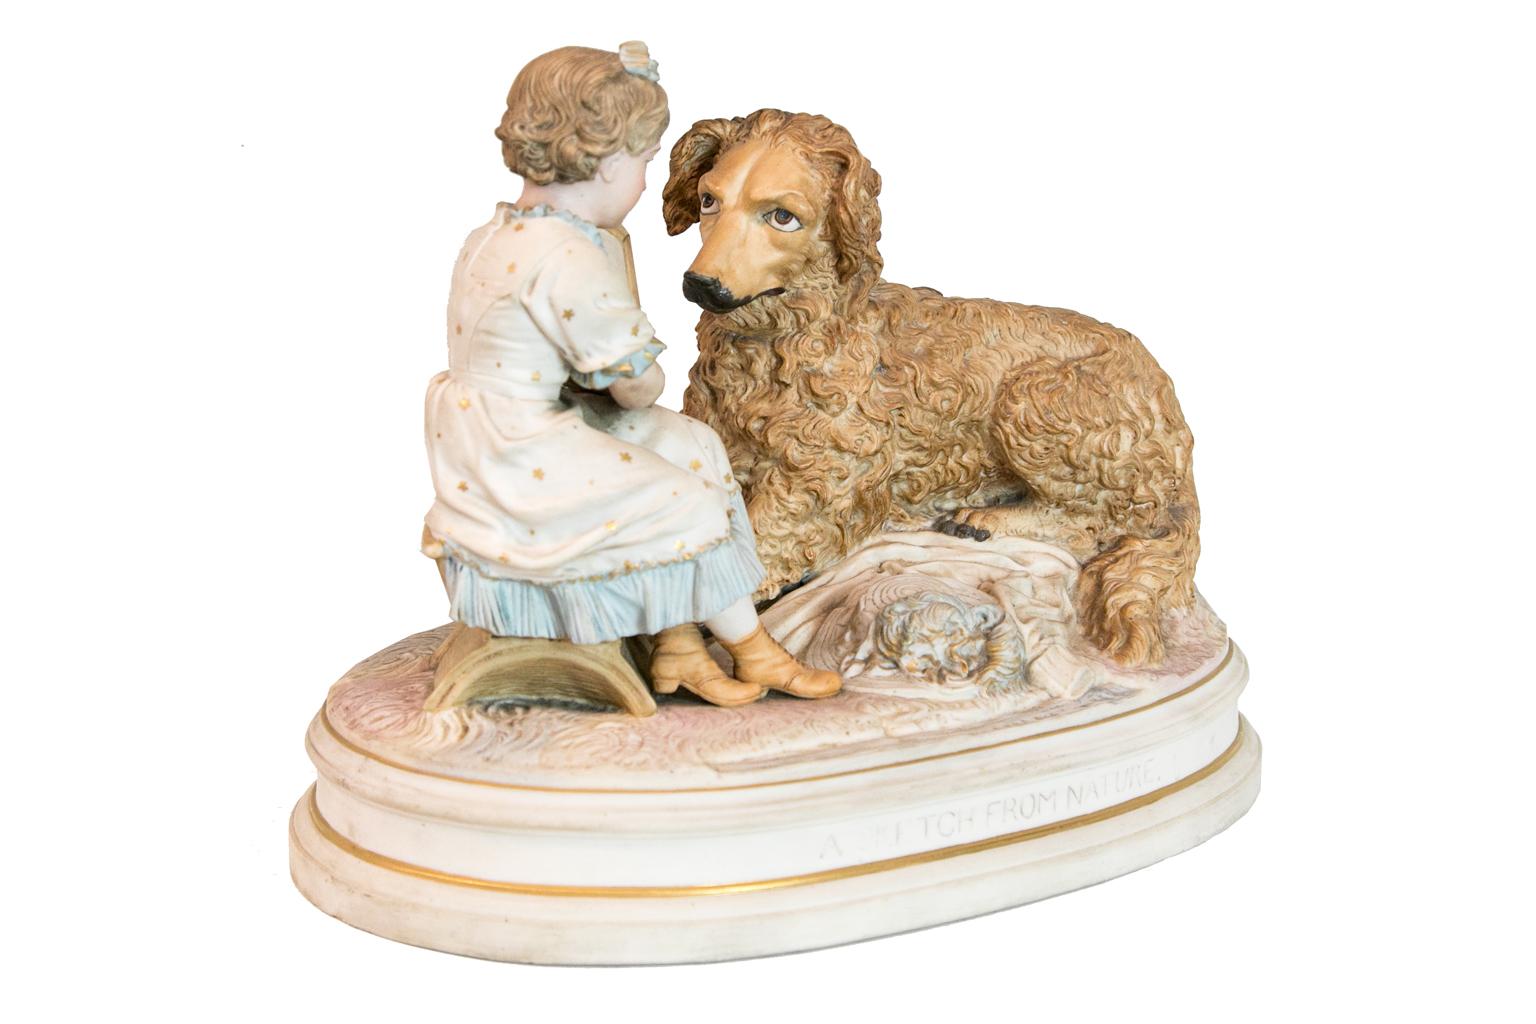 English bisque figural group depicts a figure of a fury dog with a girl illustrating a drawing of a dog. The title, 